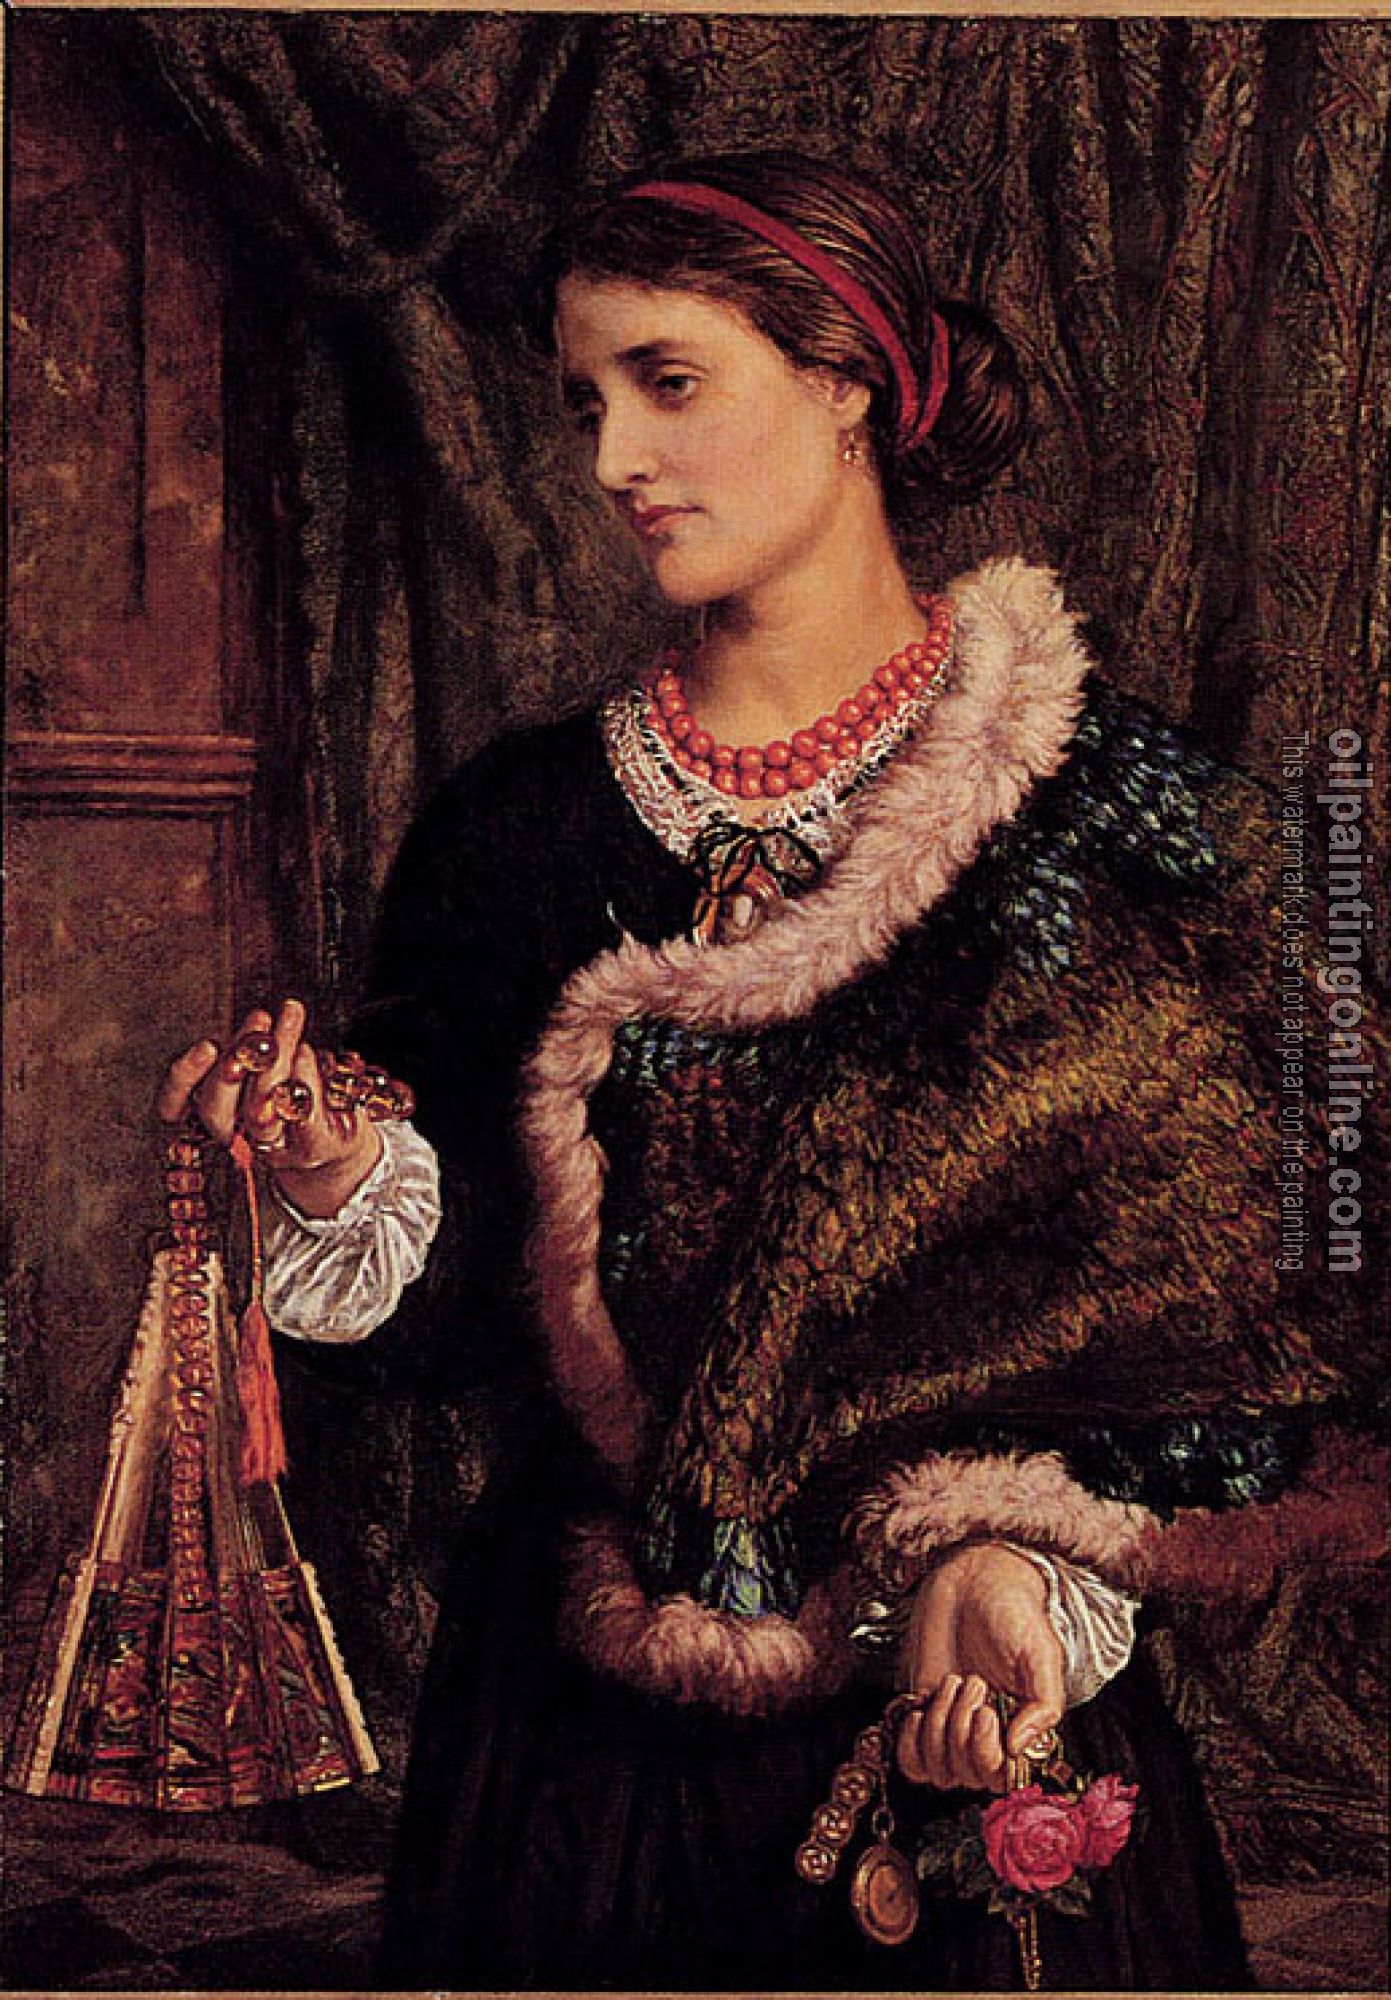 Hunt, William Holman - The Birthday A Portrait Of The Artists Wife Edith